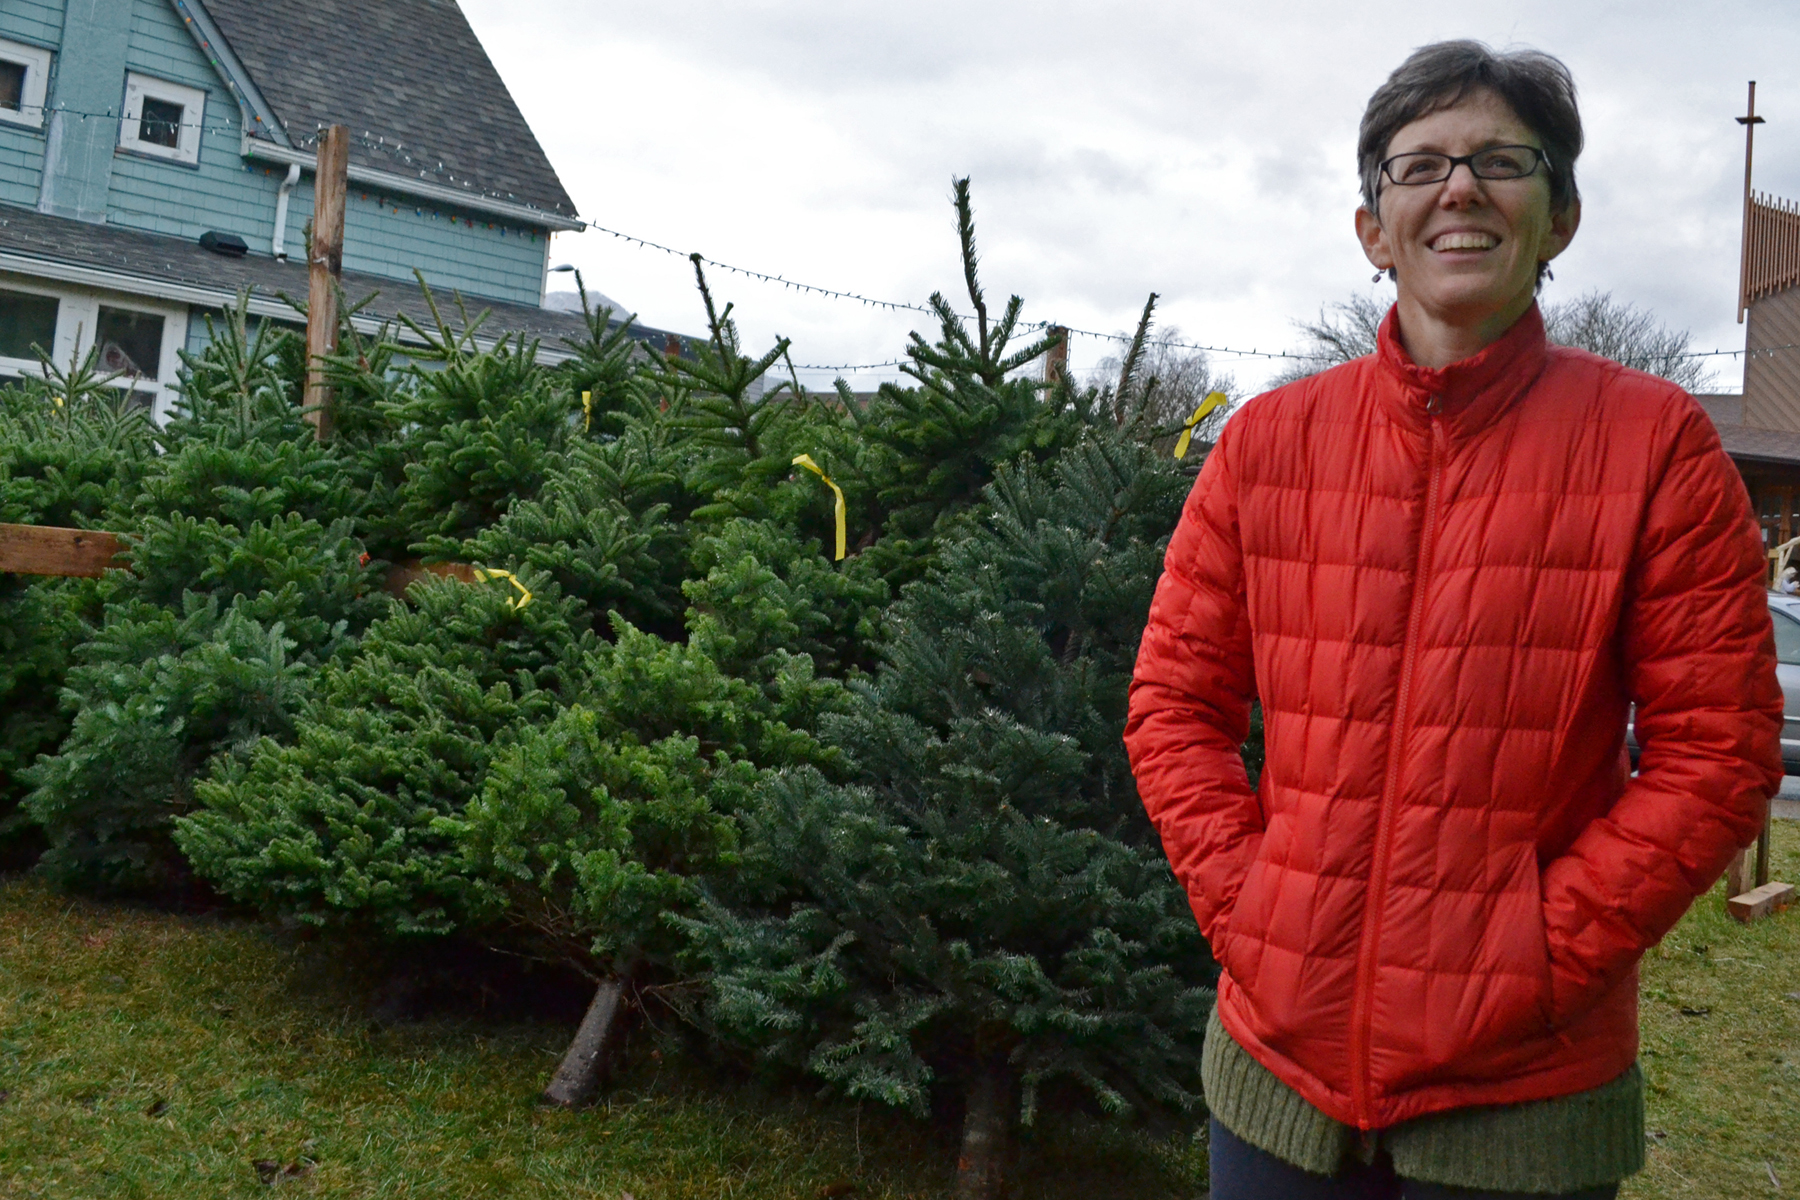 Kim Champney stands outside of her home in the Flats, where her children run a Christmas tree business each year. Champney and her kids received a shipment of 200 trees from Orting, Washington, late last week. They plan to donate $5 from each tree sale to Juneau's Housing First Project.